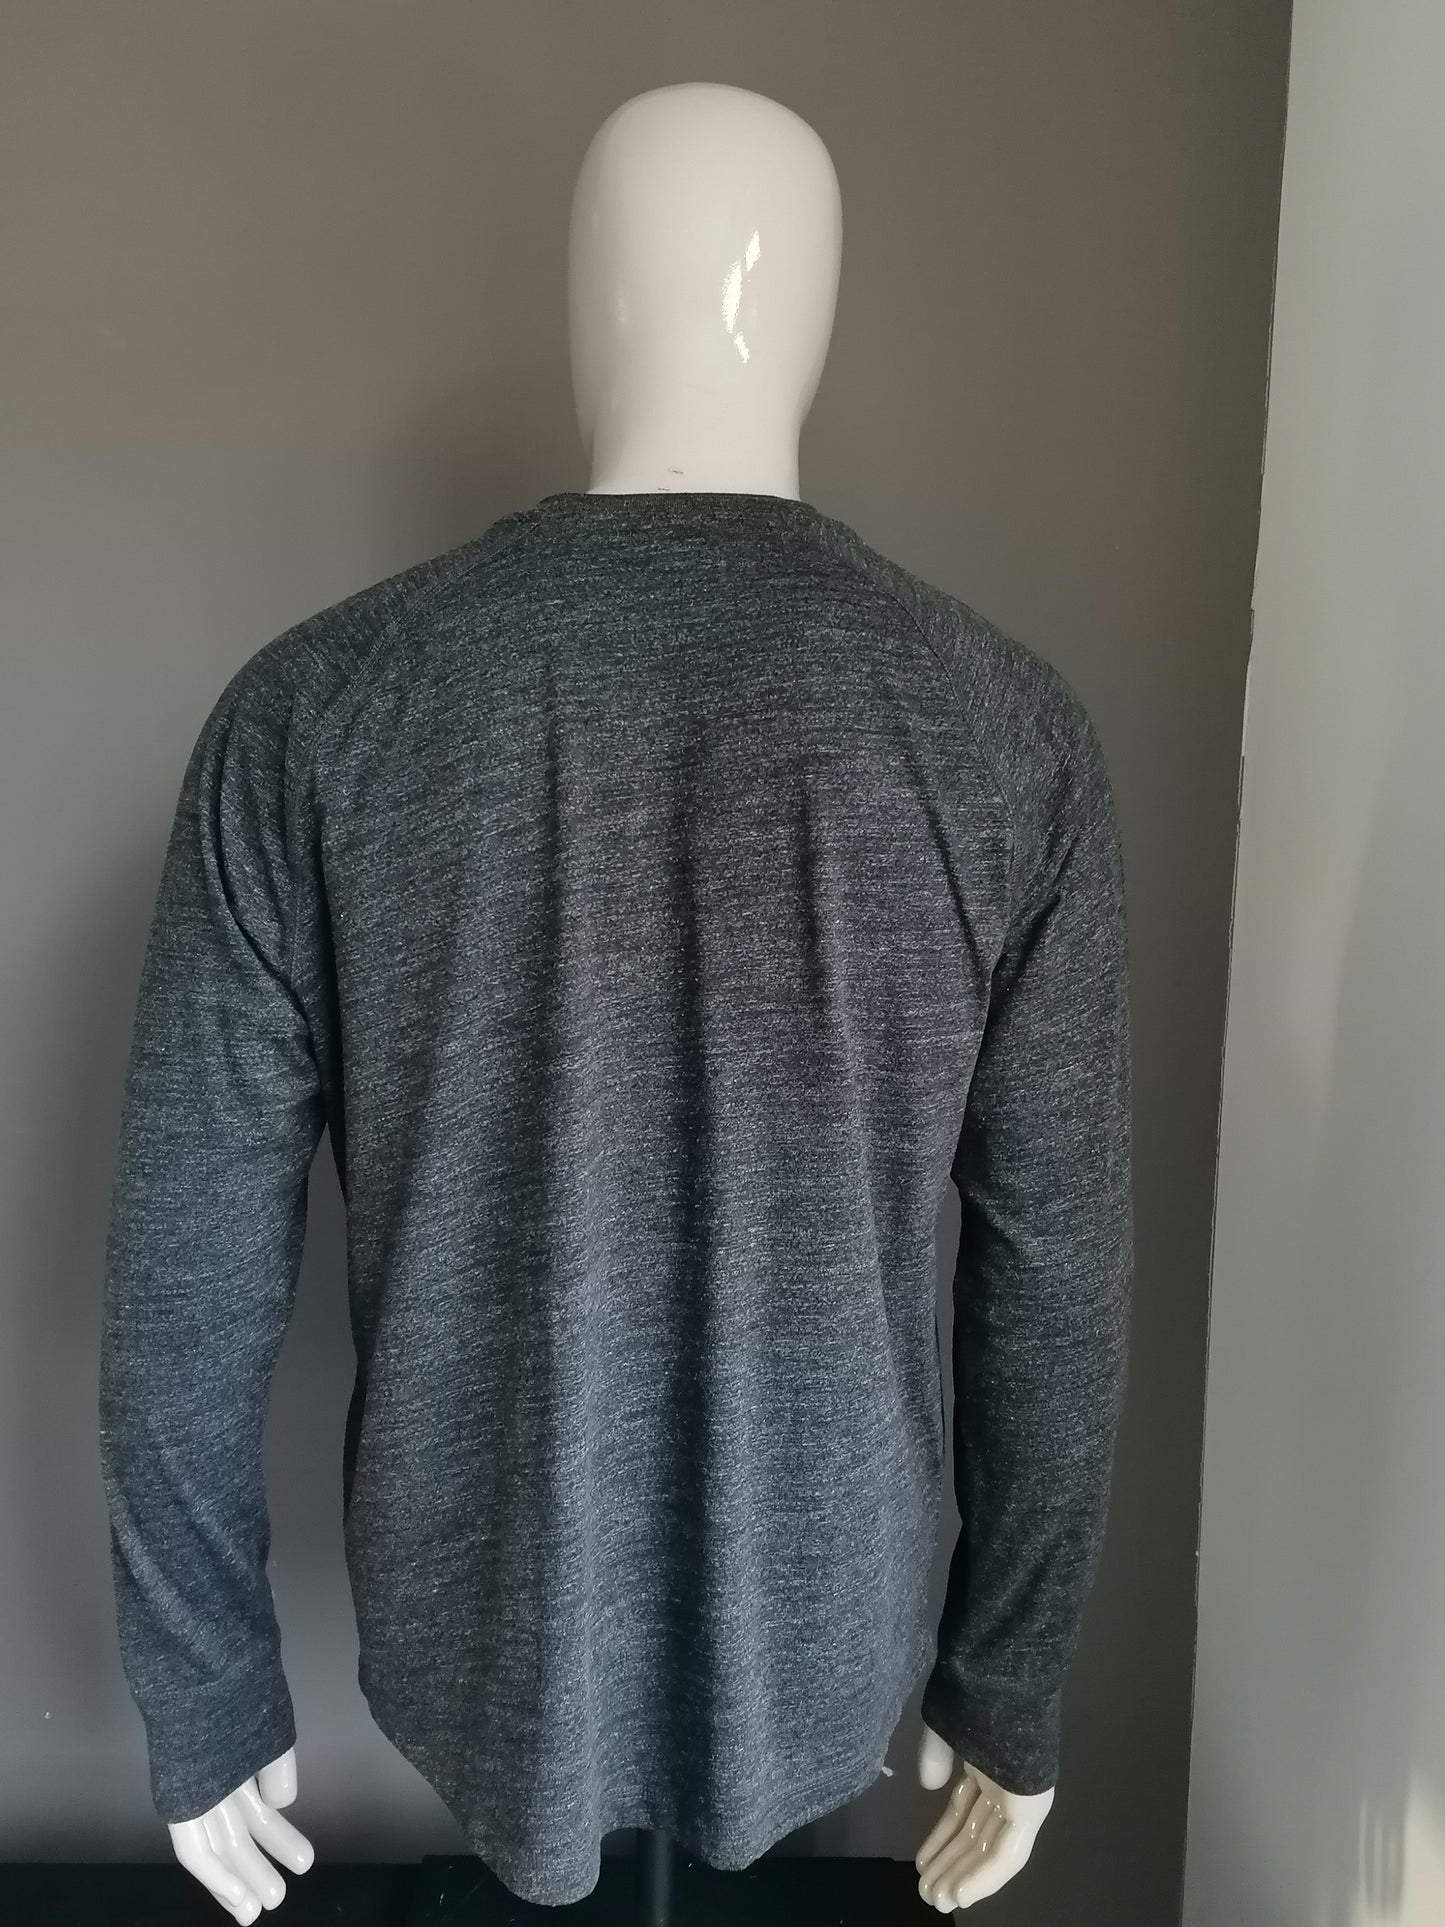 Gap thin sweater with buttons. Gray mixed. Size XL.